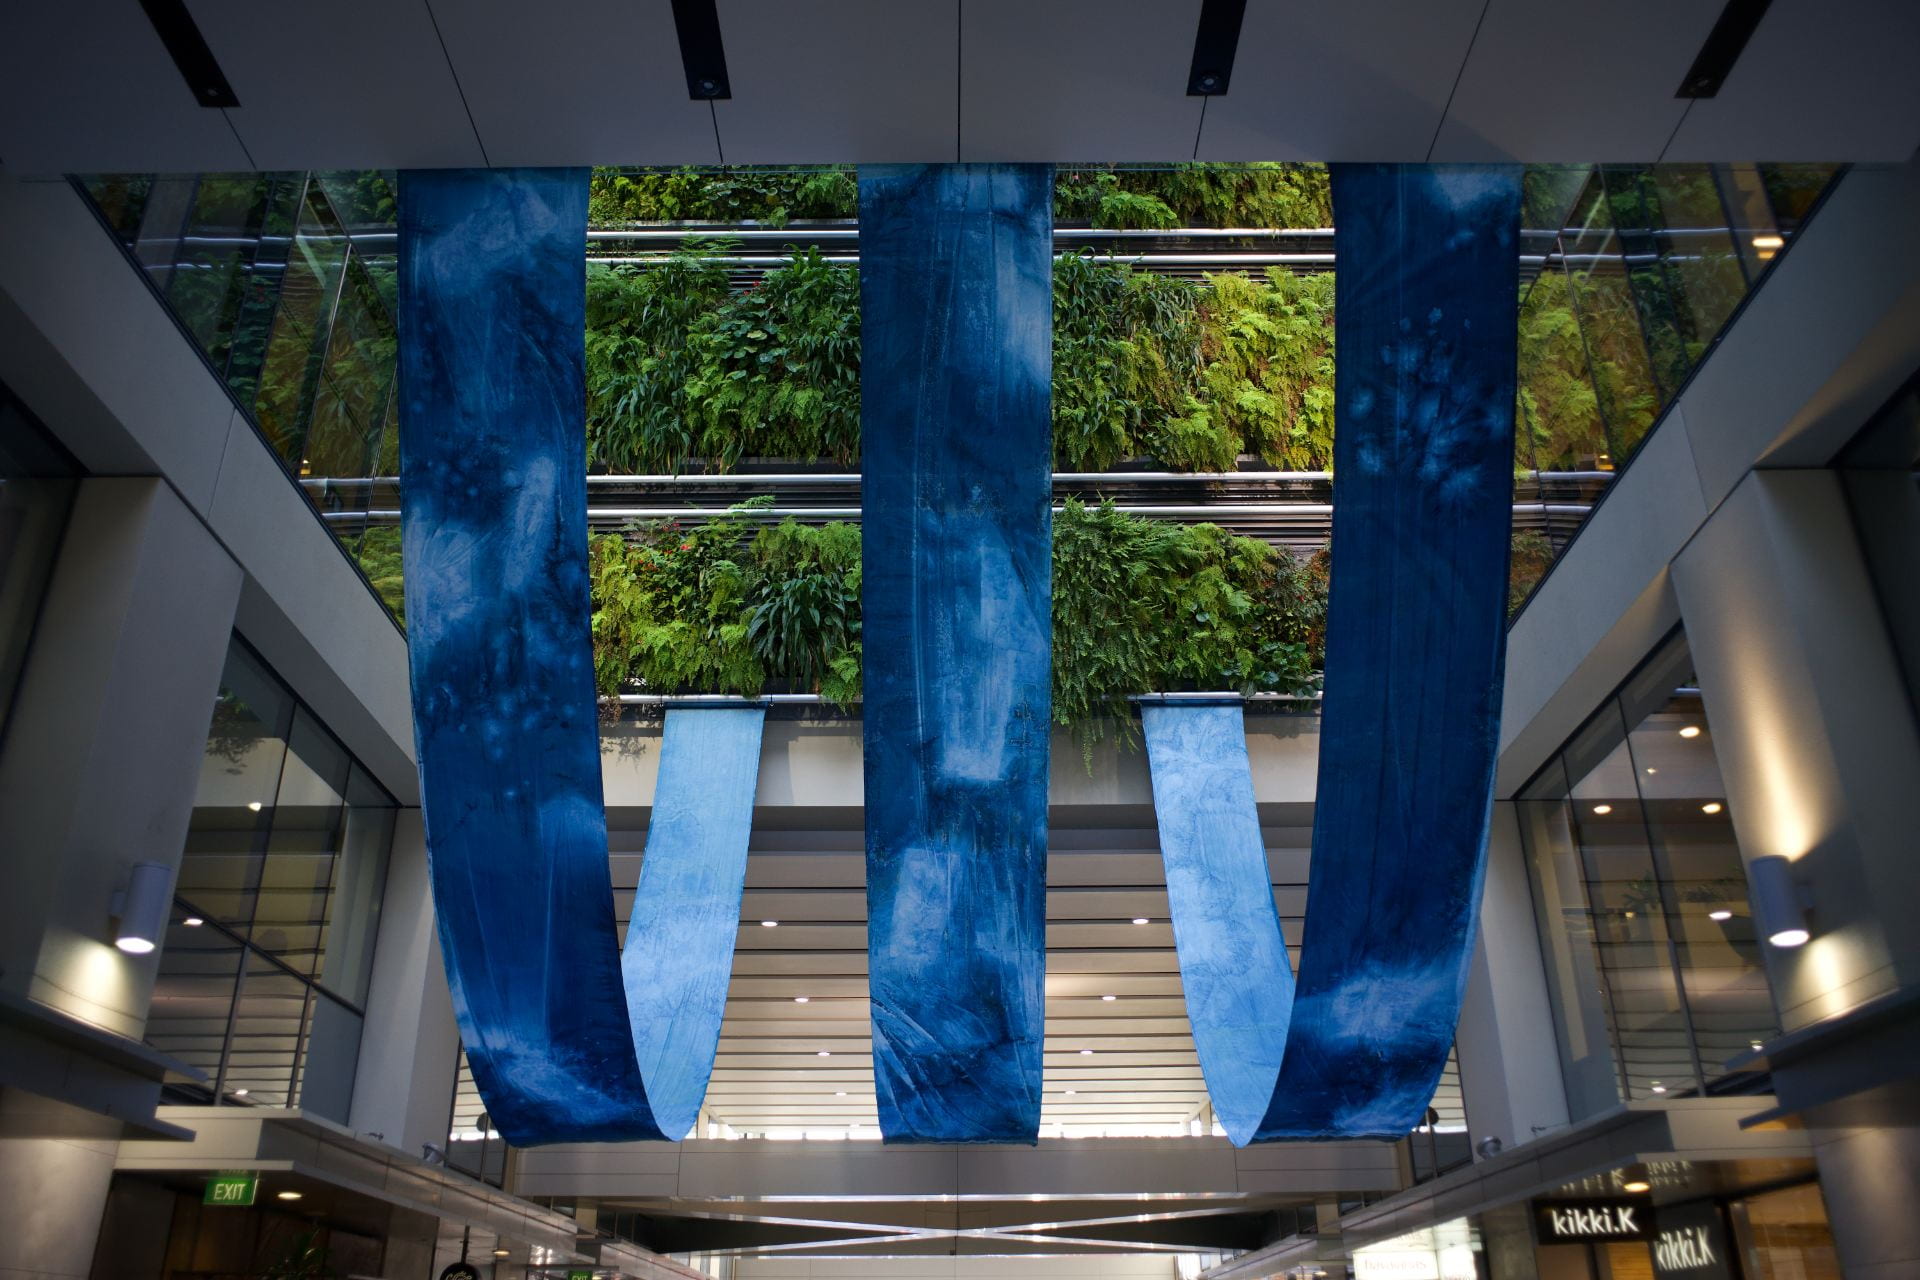 Three long, narrow strips of cloth hang in U-shapes in the courtyard of an inner-city building. A living plant wall can be seen in the background.